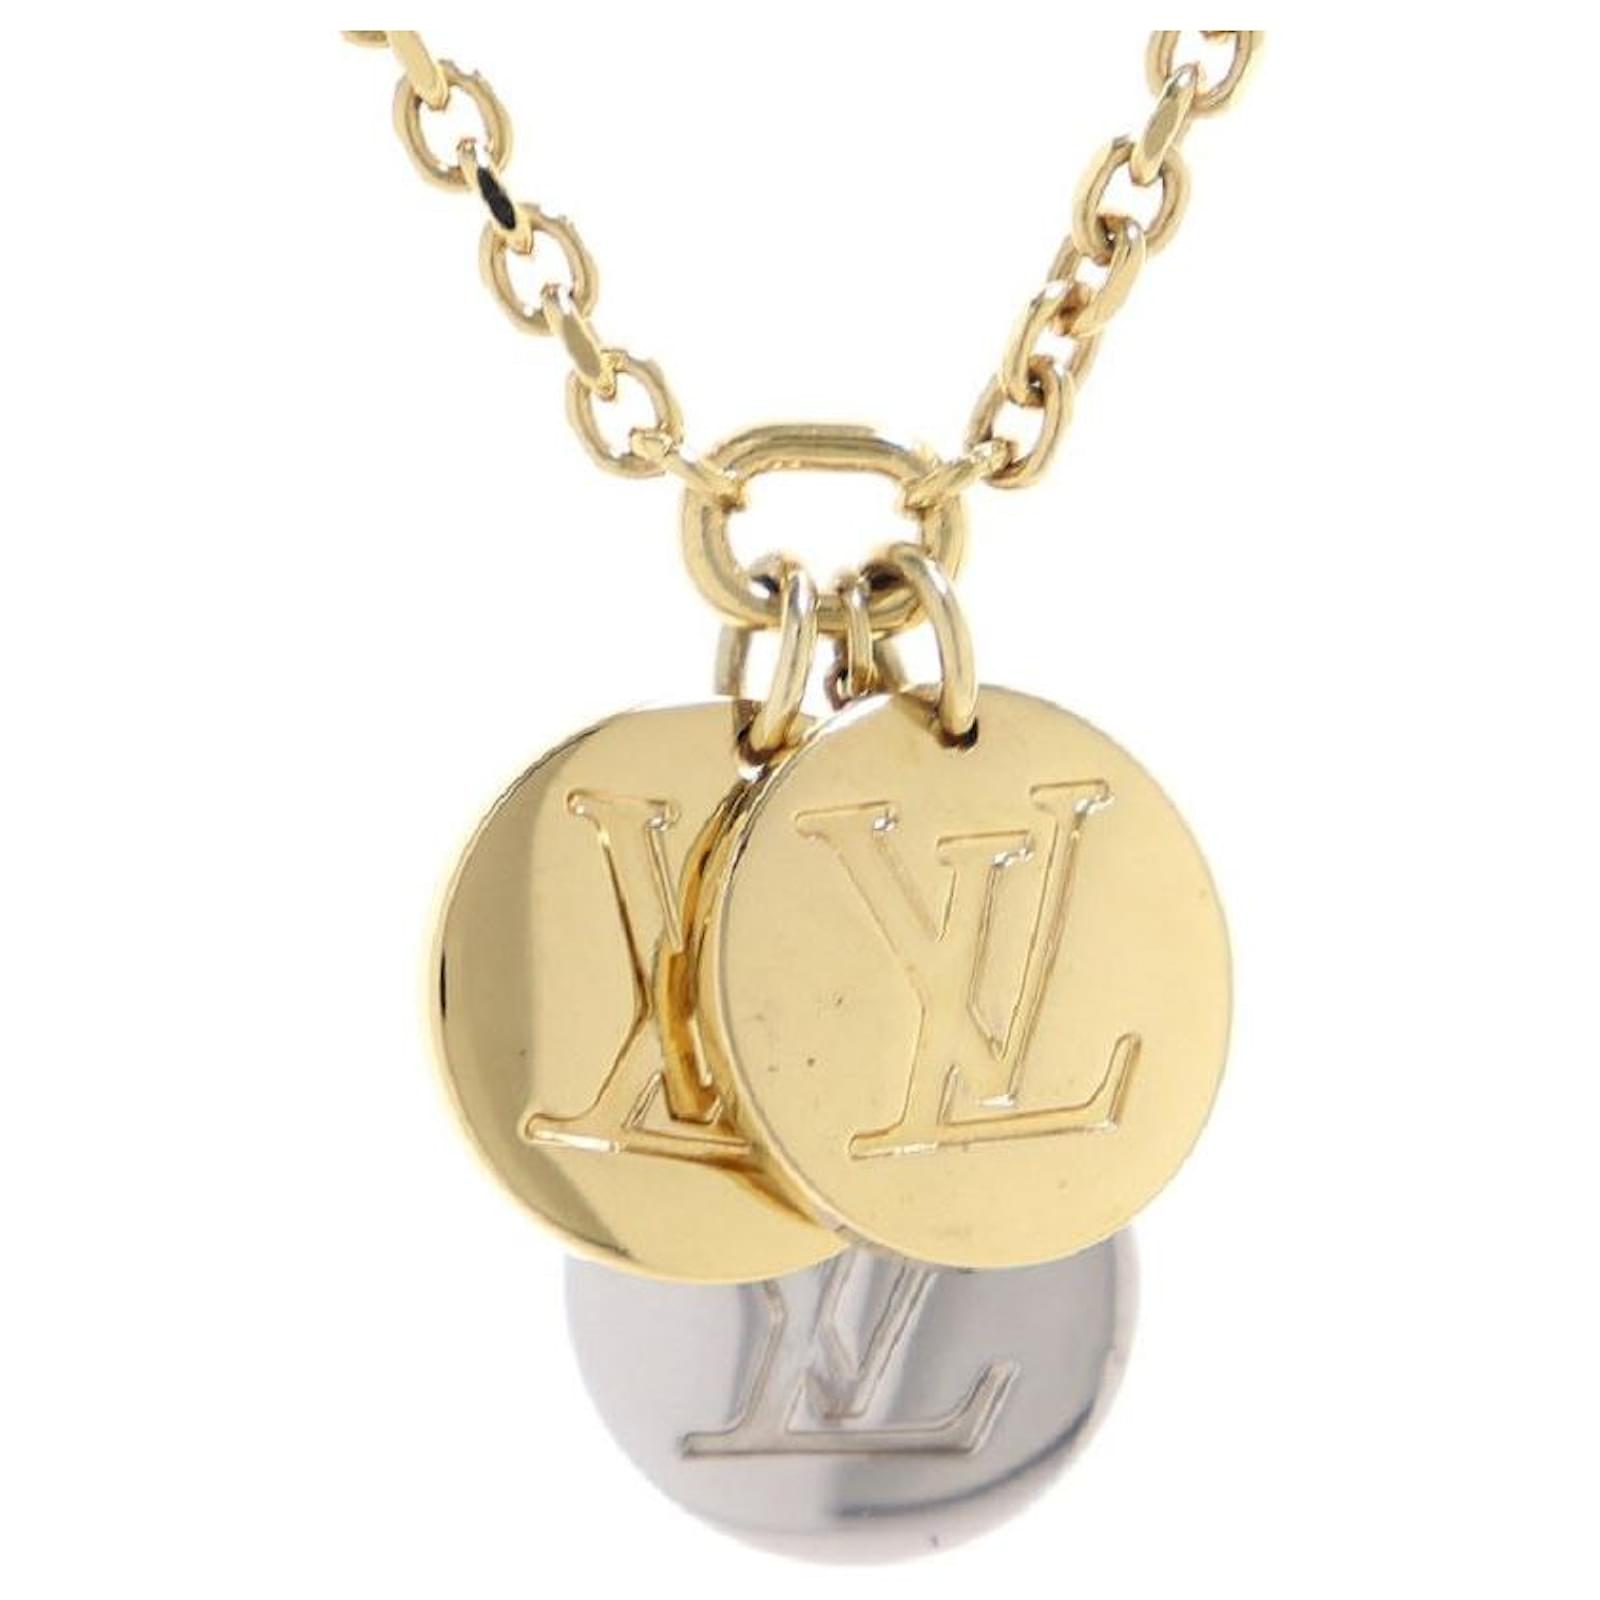 Louis Vuitton Collier Miss LV Necklace Pink White Gold hardware